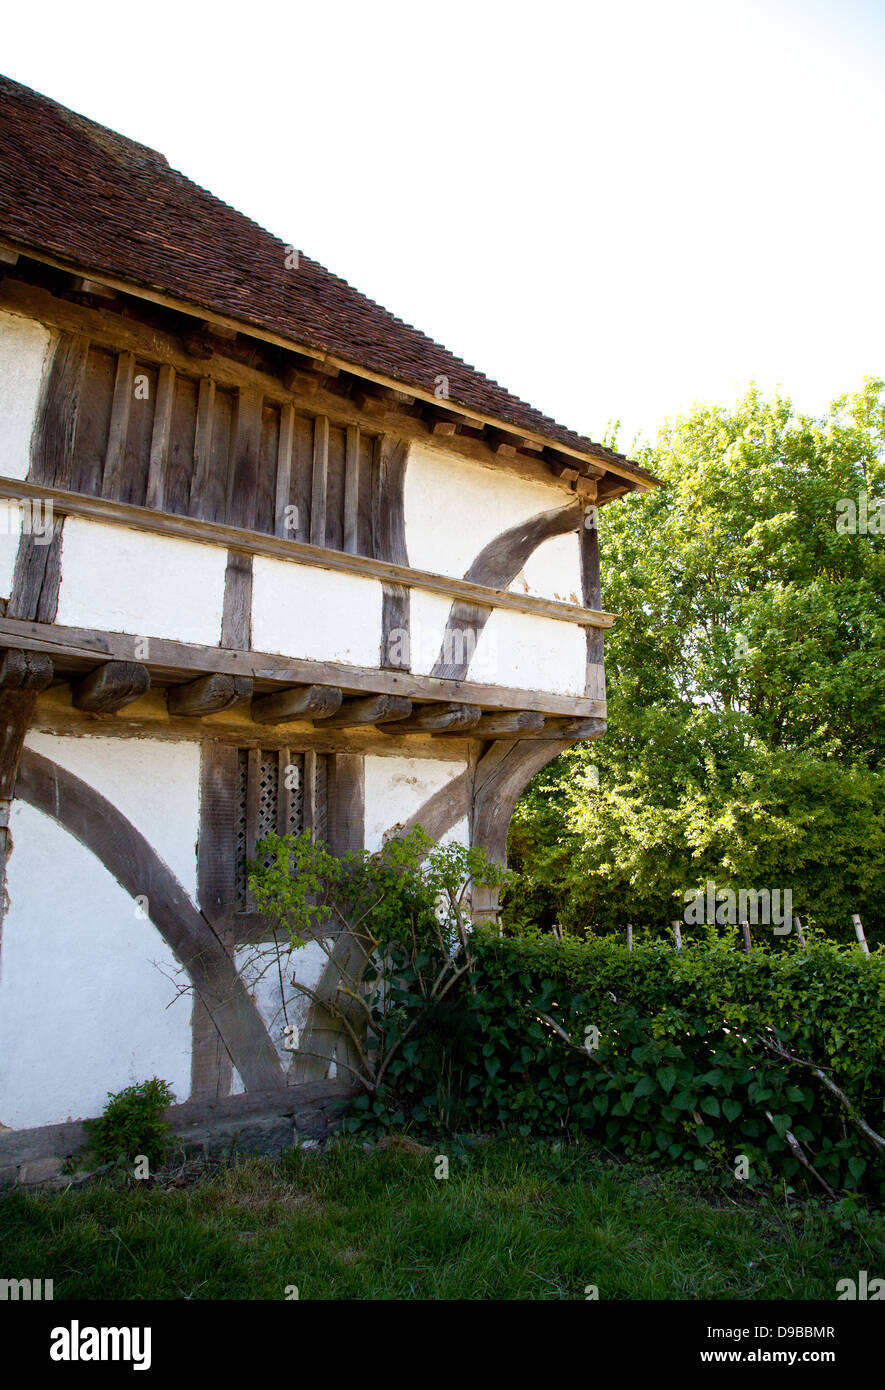 Detail of exterior of Bayleaf - a timber-framed hall-house dating mainly from the early 15th century Stock Photo